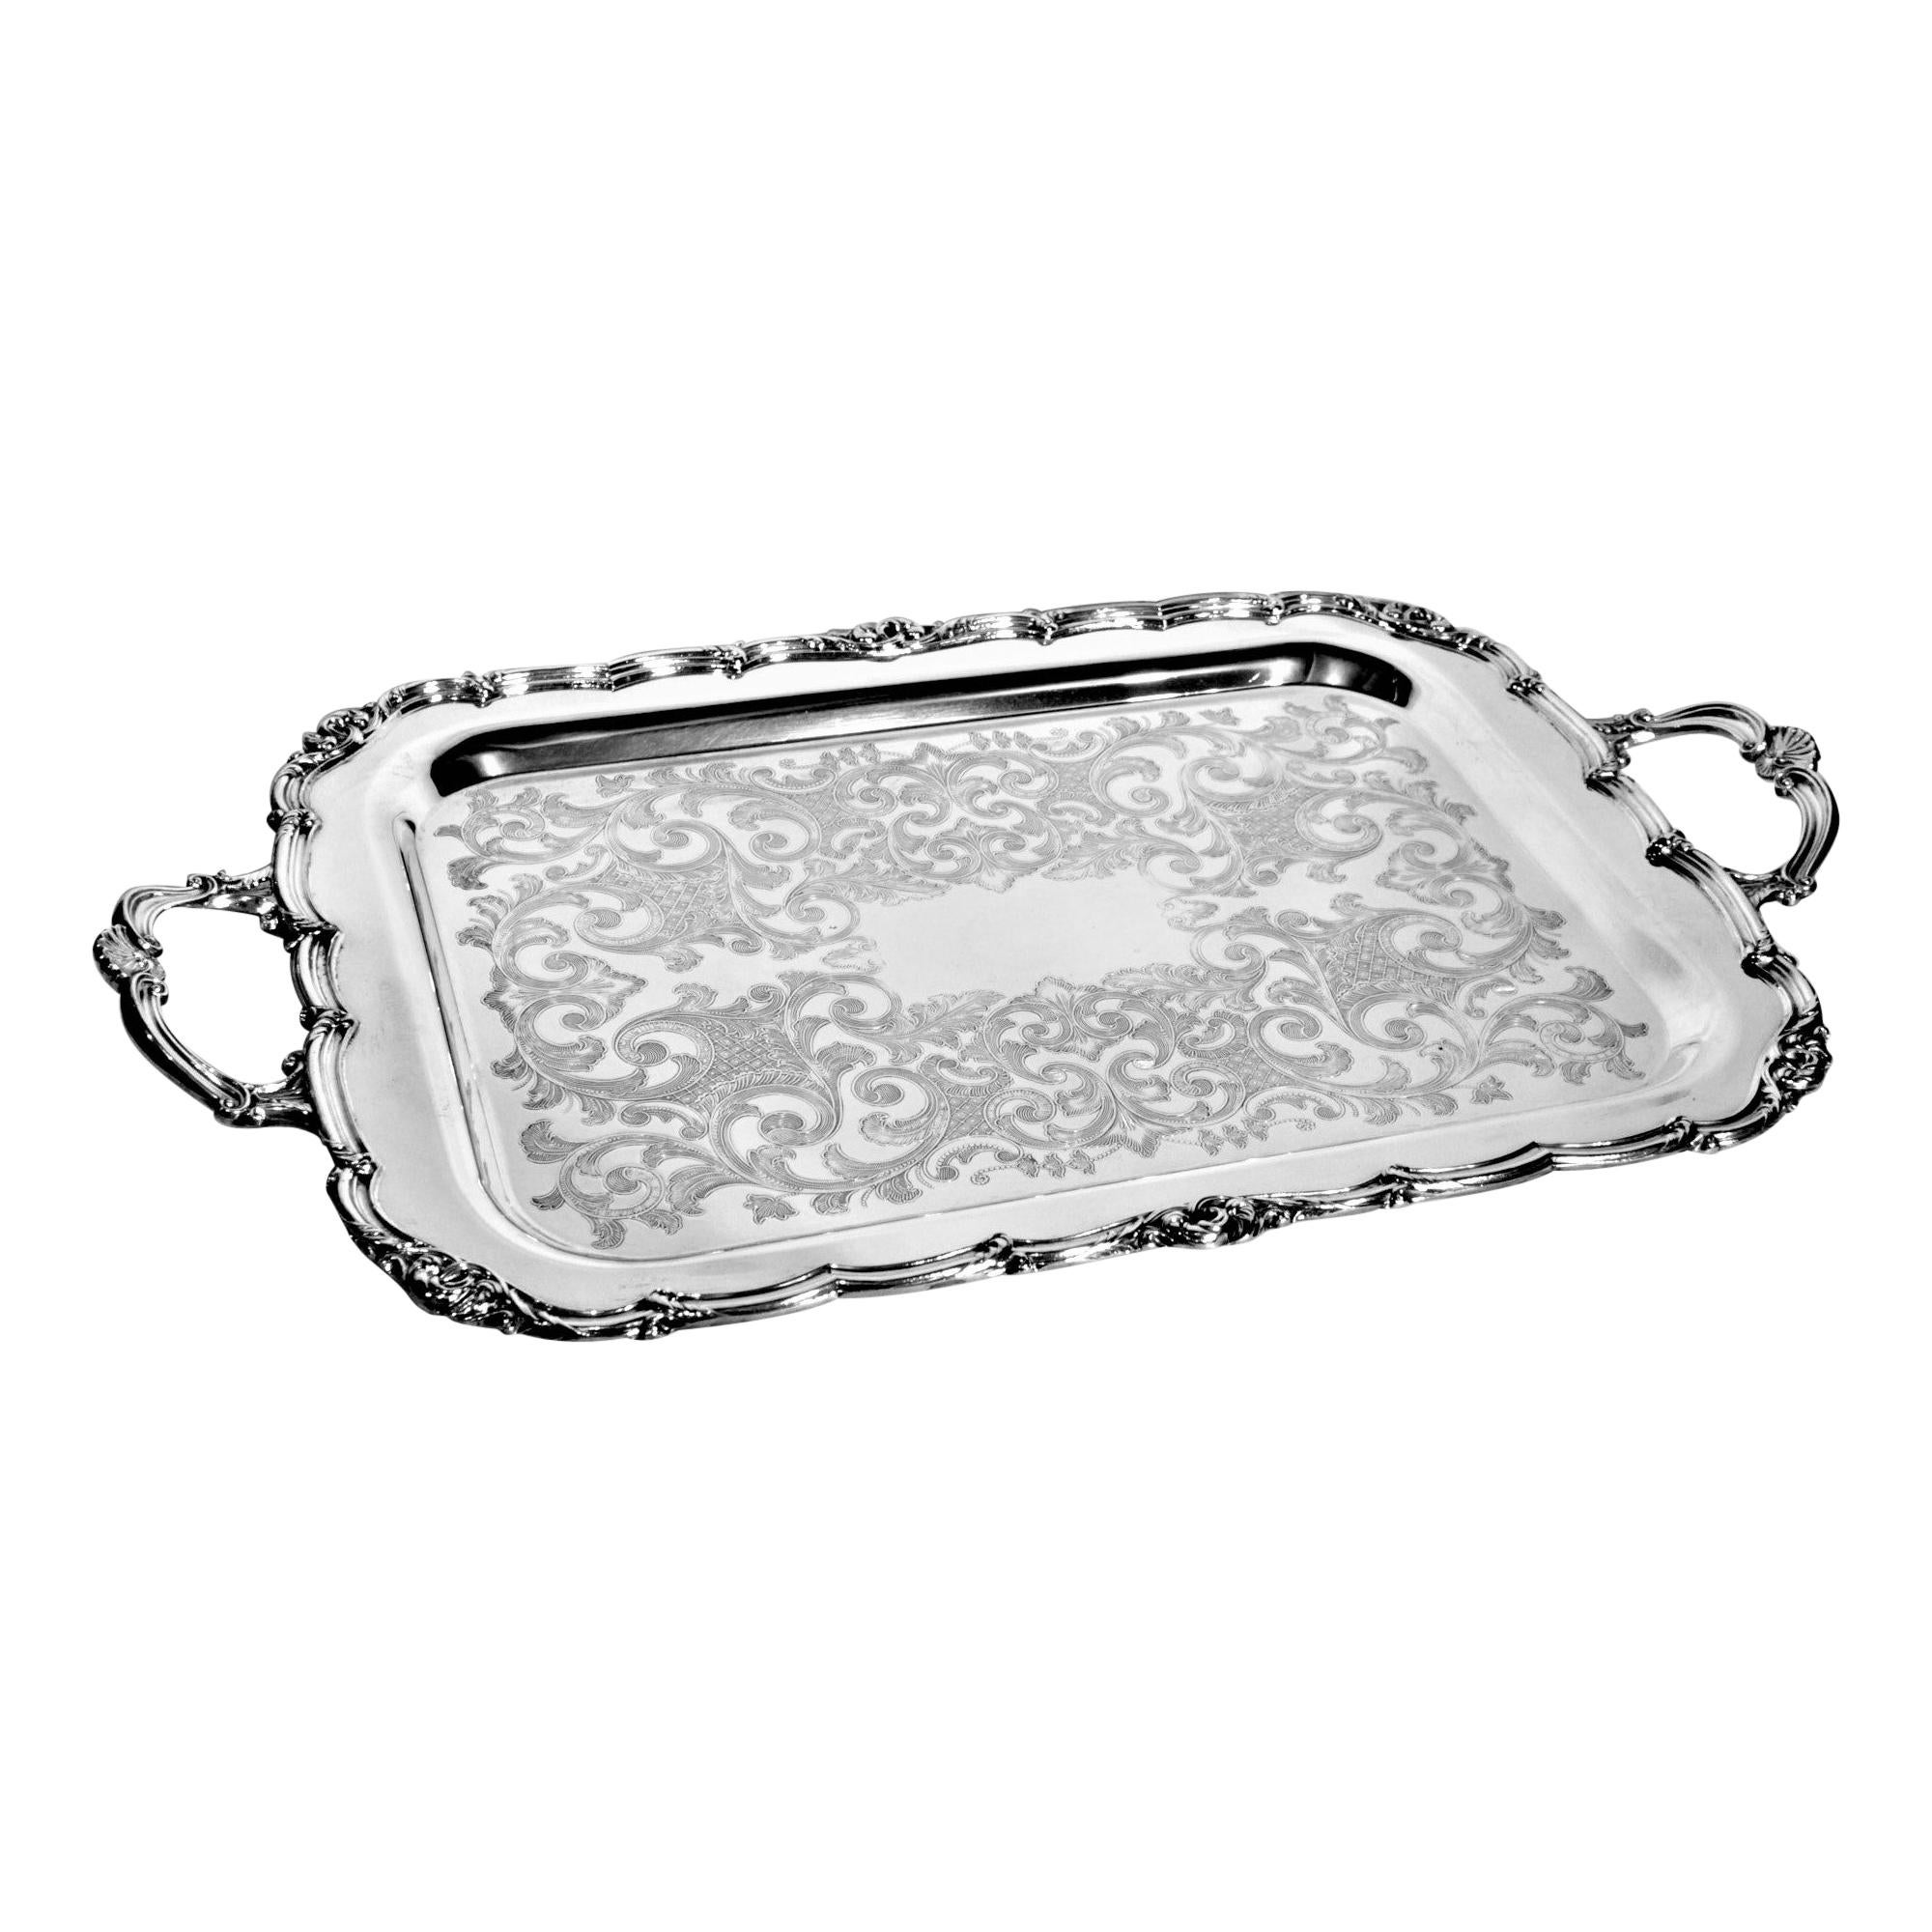 Antique Styled Silver Plated Serving Tray with Ornate Engraving & Handles